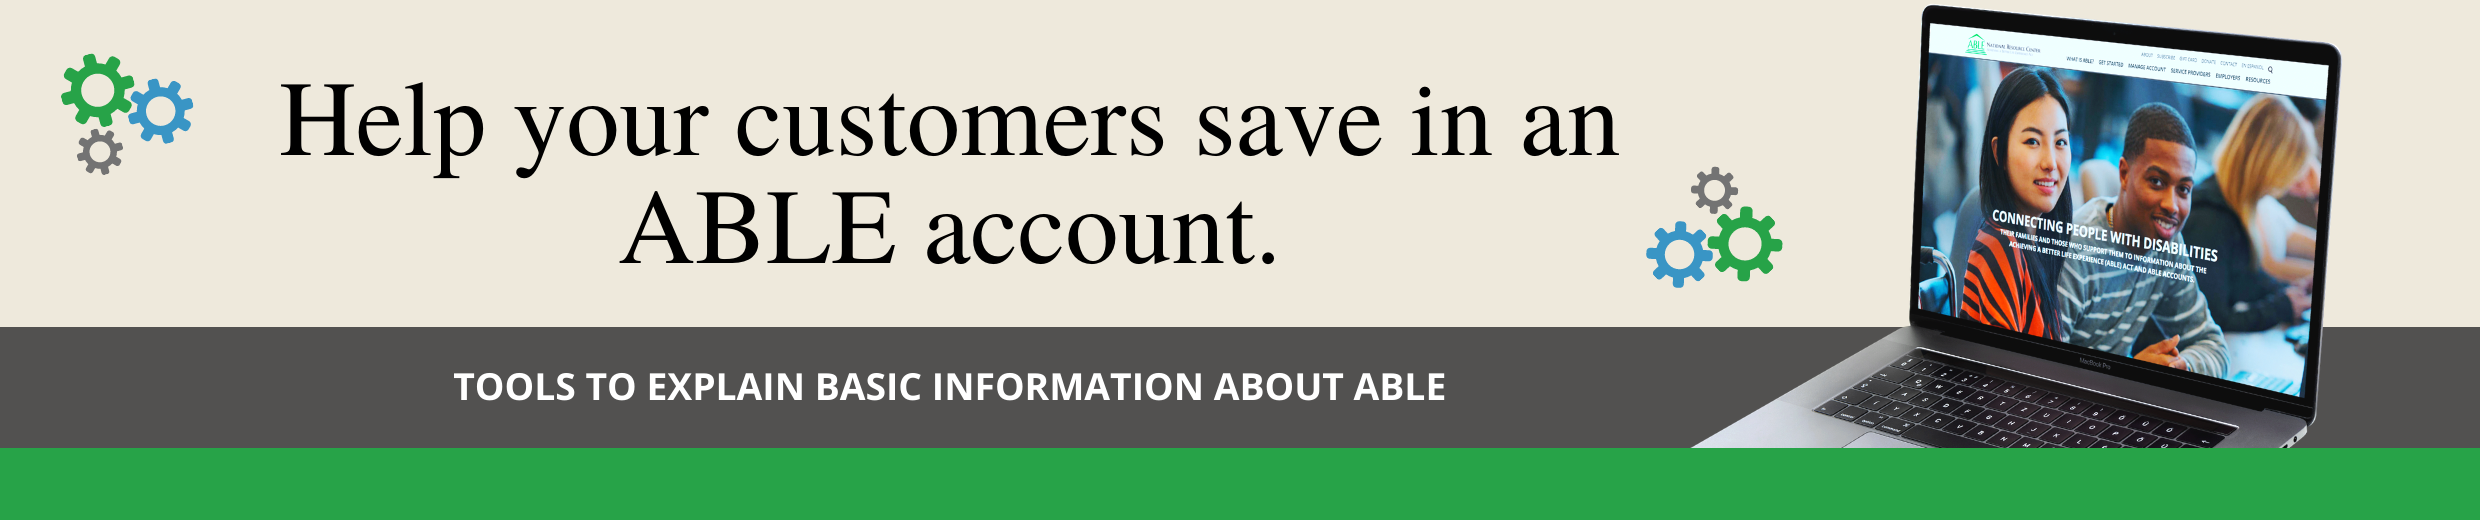 Help your customers save in an ABLE account